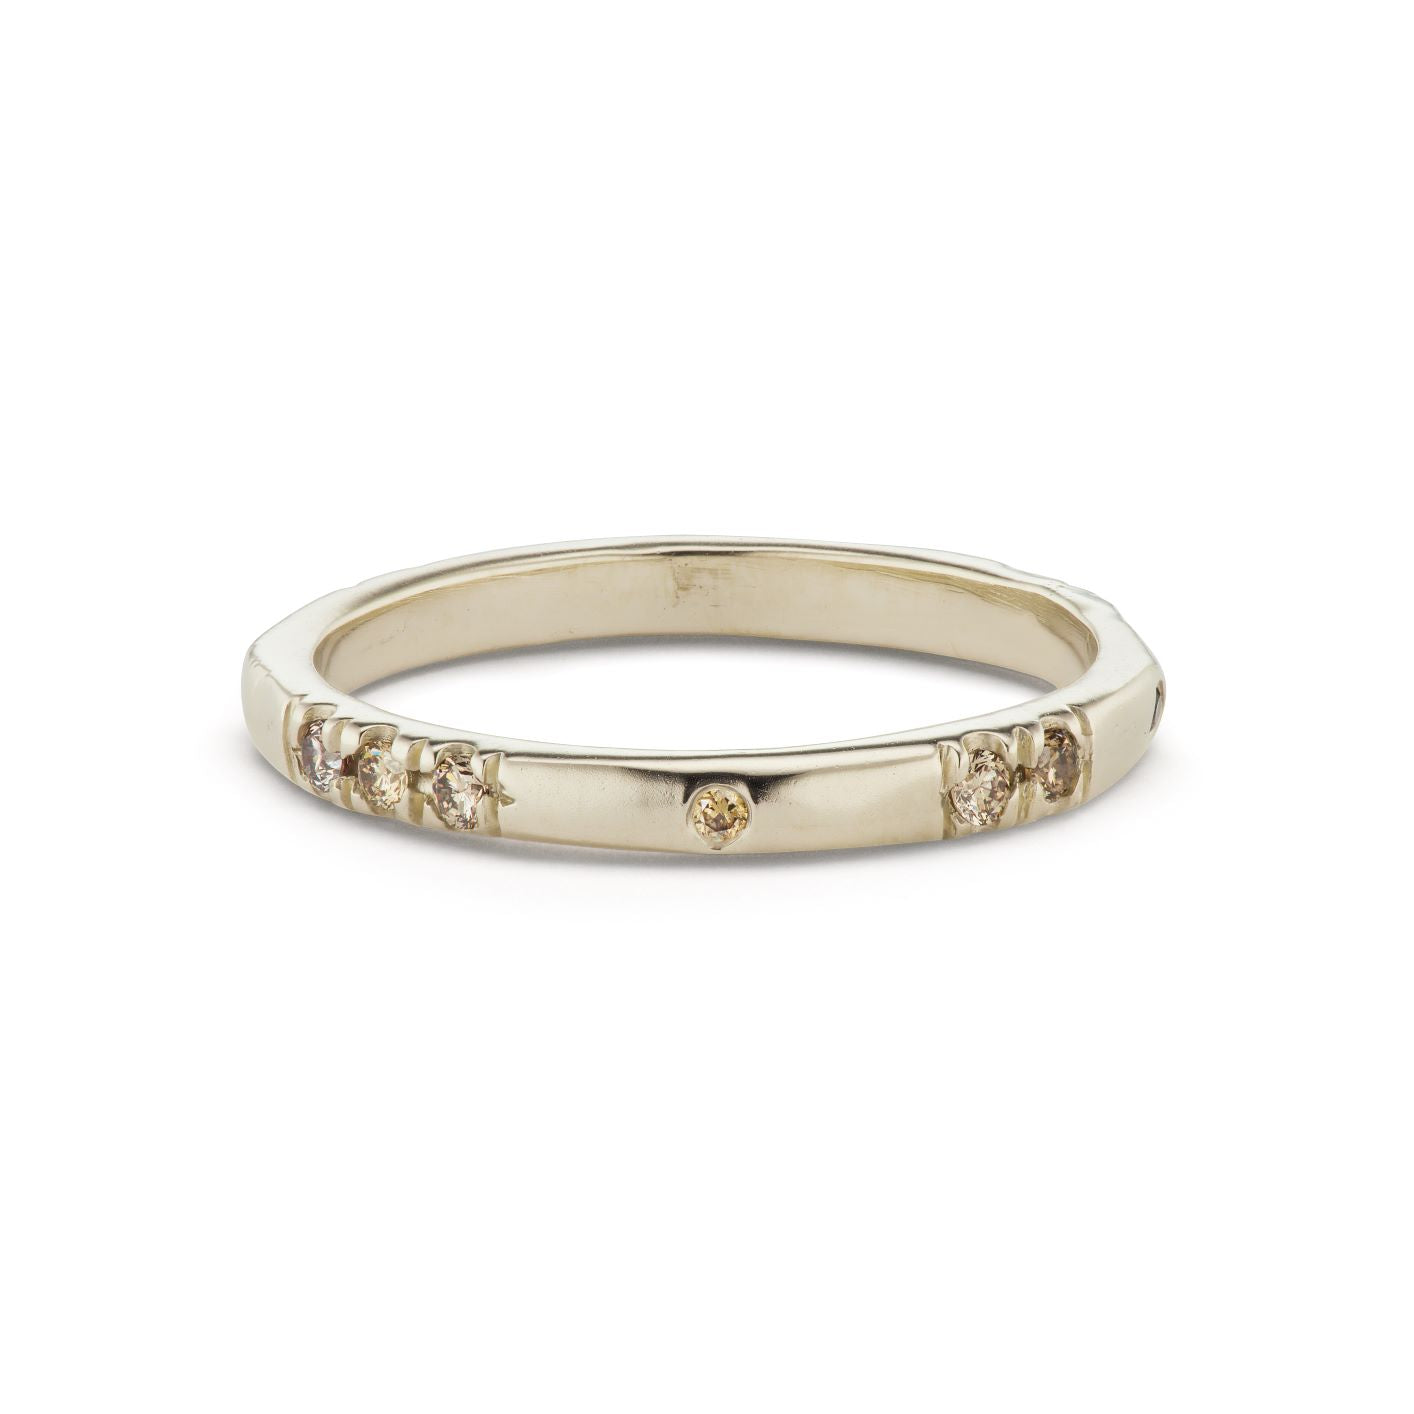 Sand Pave Band - White Gold